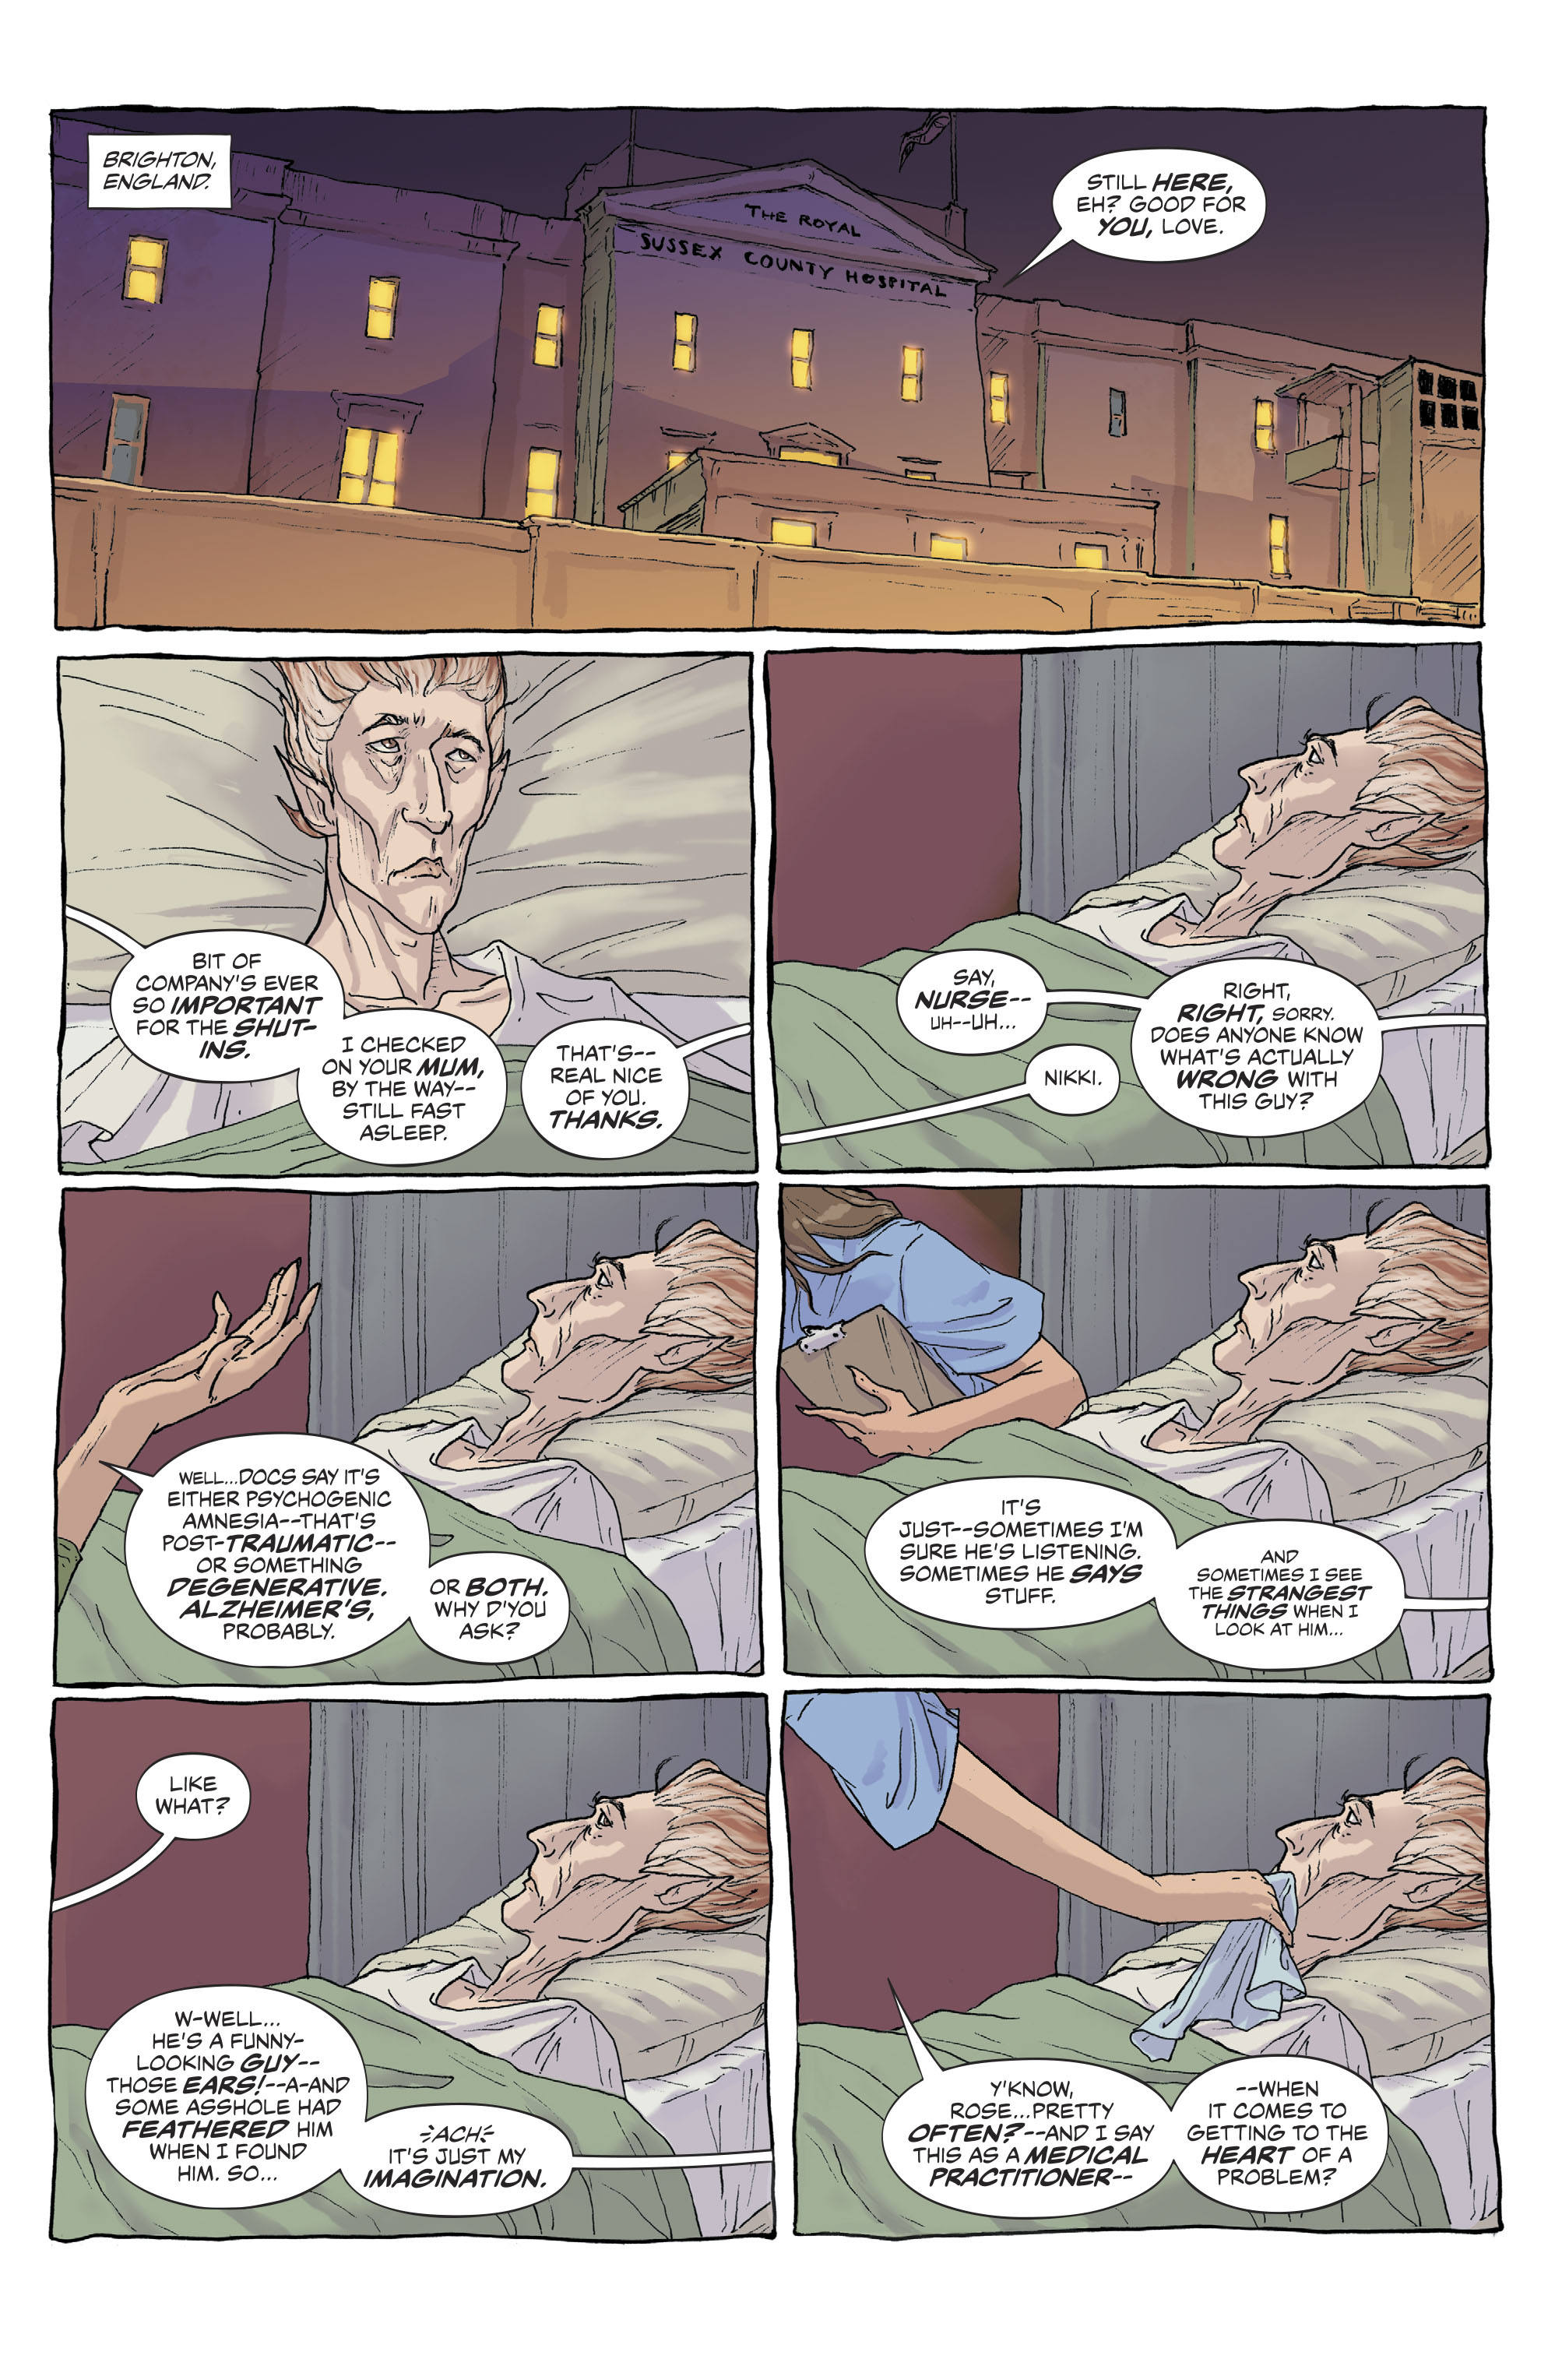 The Dreaming (2018-): Chapter 8 - Page 2